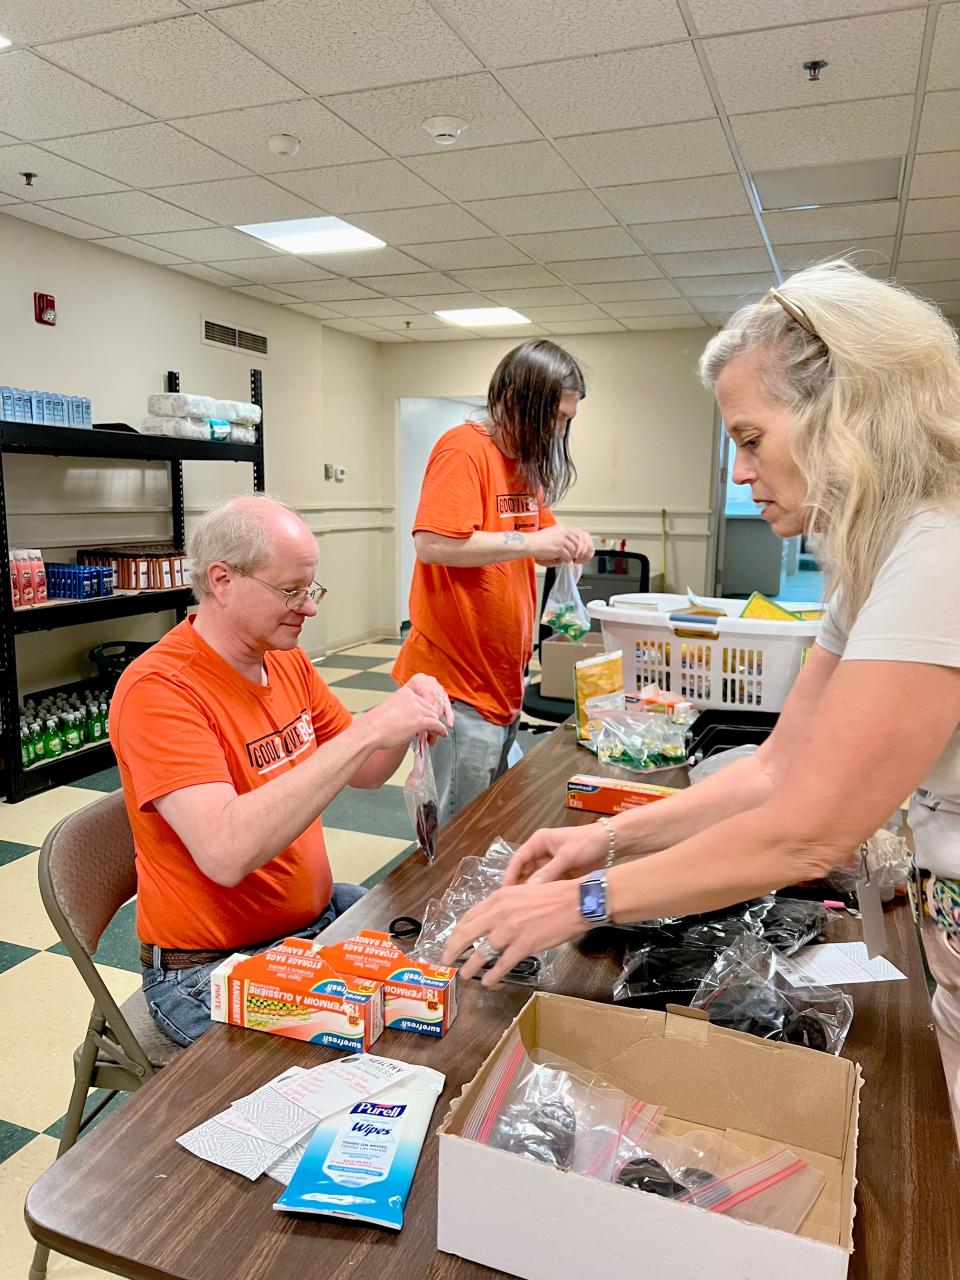 Volunteers Charlie Foreman, left, and Ted Kajencki help United Way's community education advocate Stacey Abeles pack hygiene products for delivery to a local school.